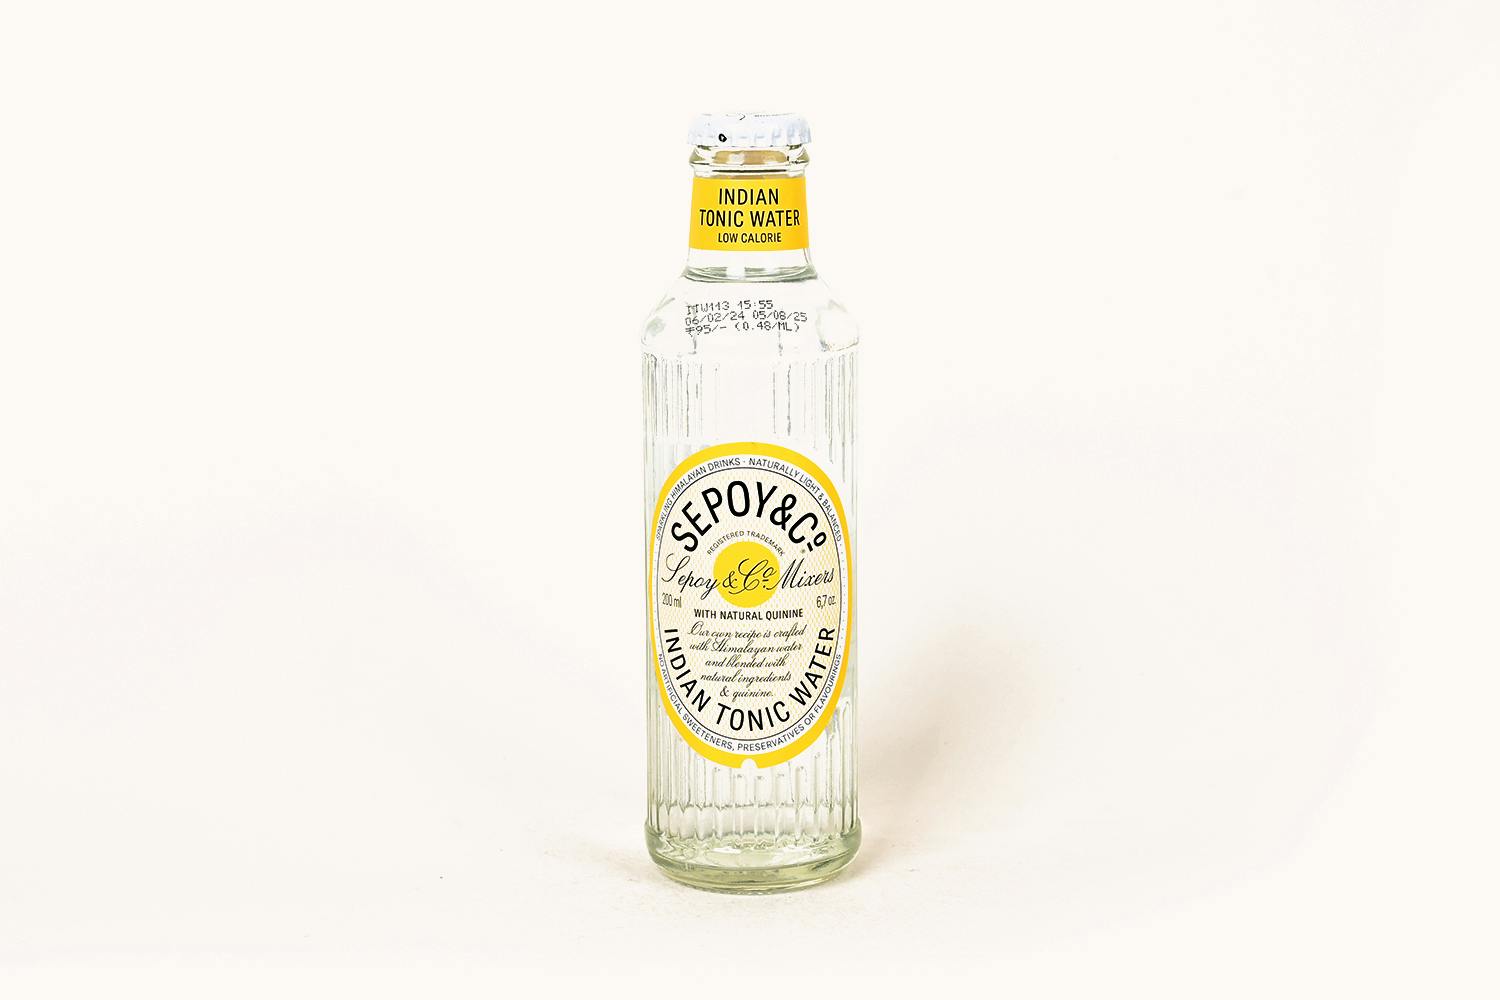 Sepoy & Co. Indian Tonic Water